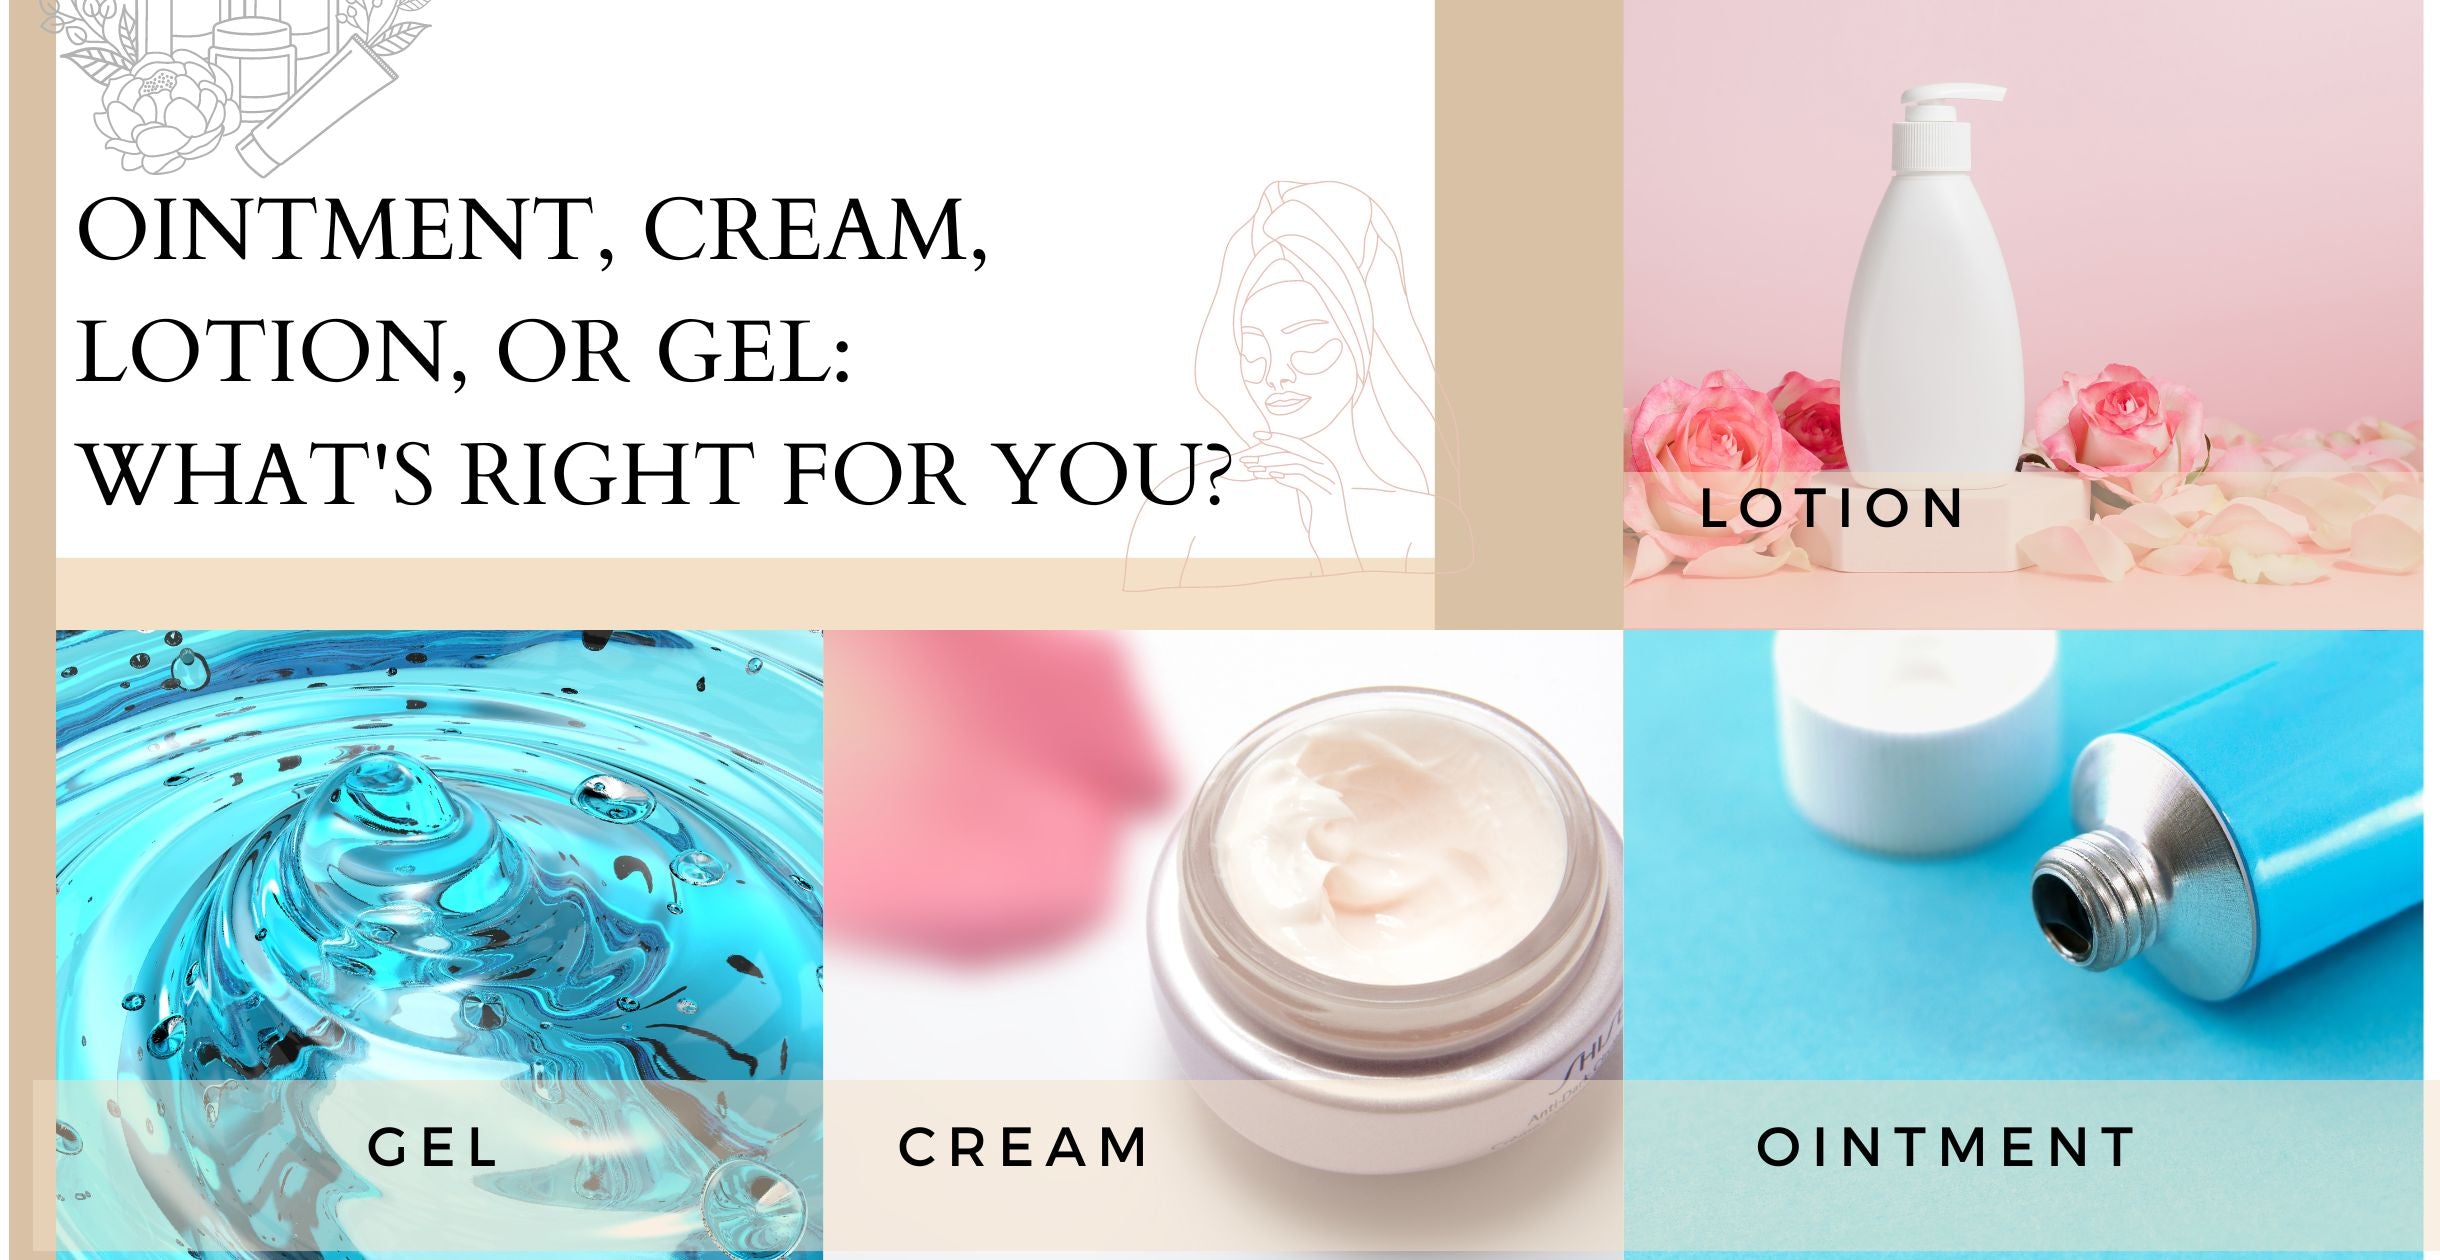 Ointment, Cream, Lotion, or Gel: What's Right for You?